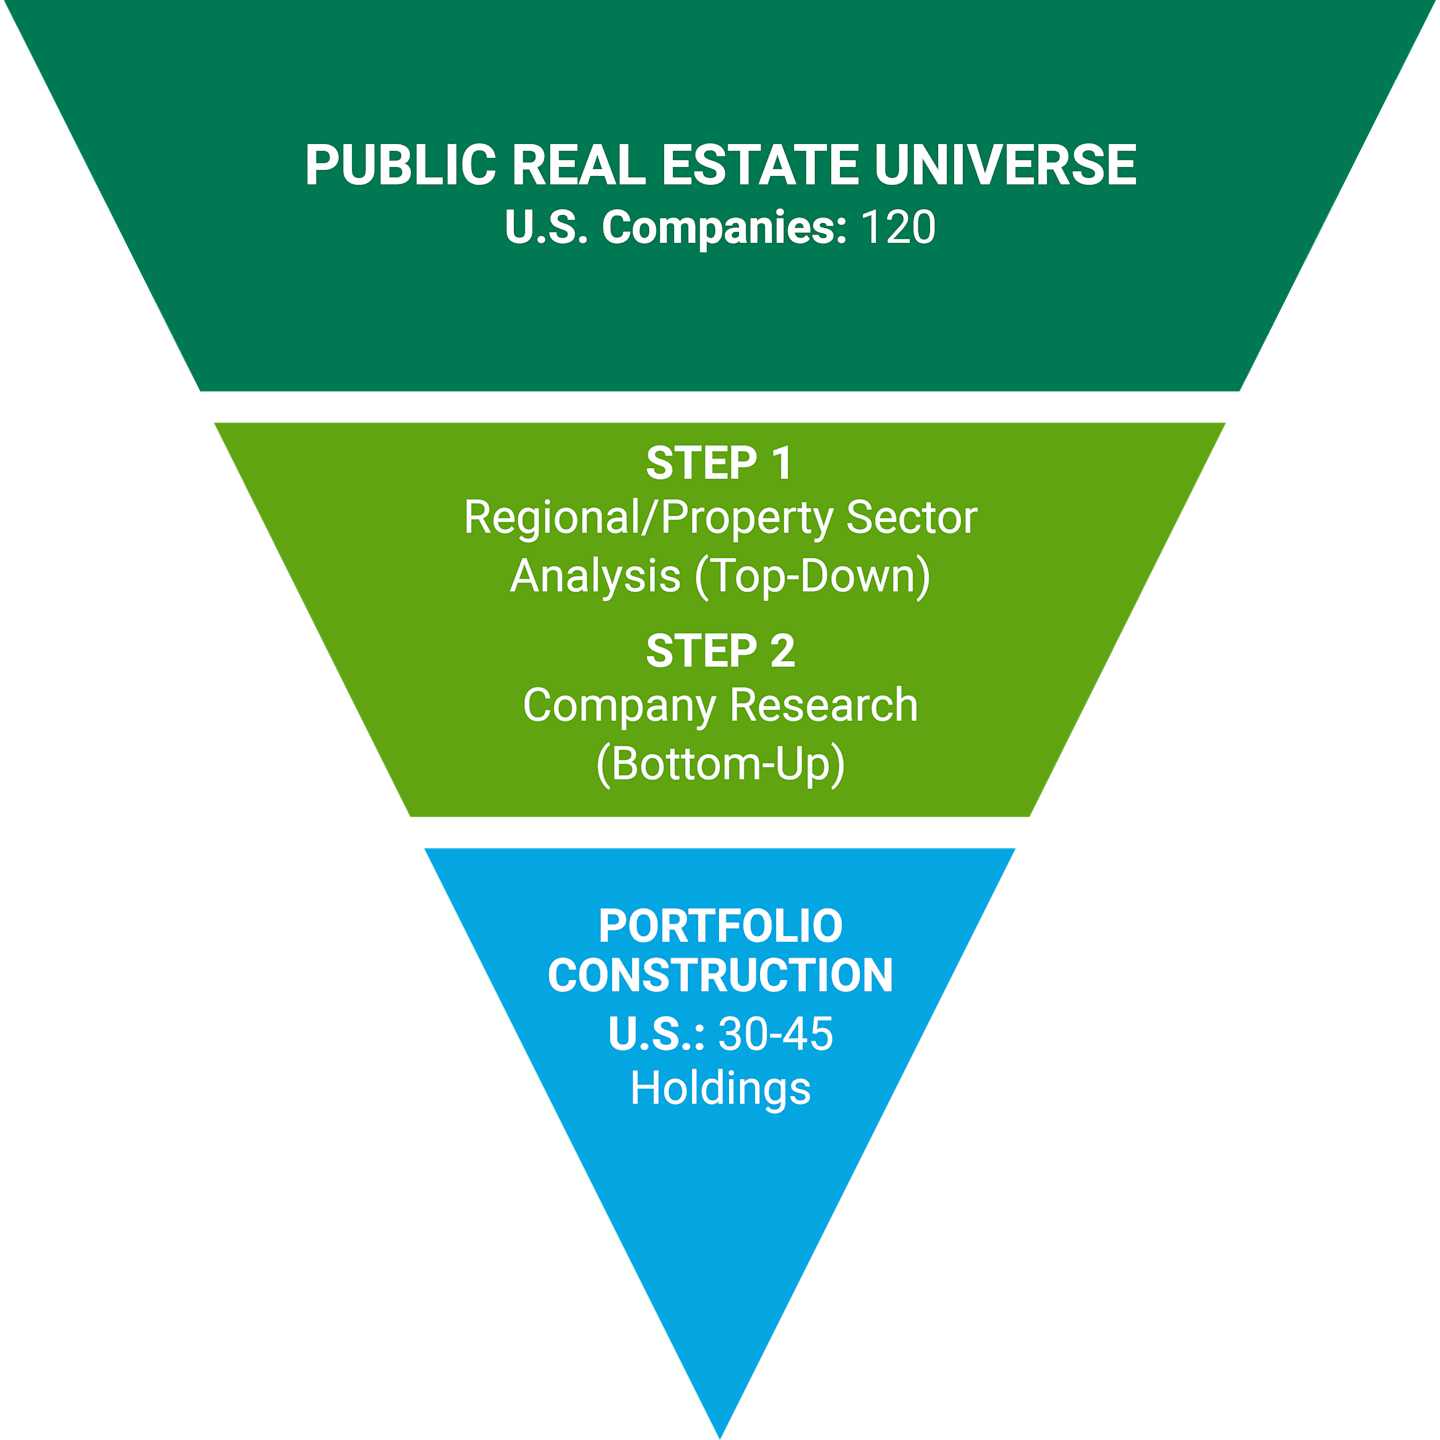 Public Real Estate Universe: U.S. Companies 120. Step 1: Regional/Property Sector Analysis (Top-Down); Step 2: Company Research (Bottom-Up). Portfolio Construction: 30-45 holdings.